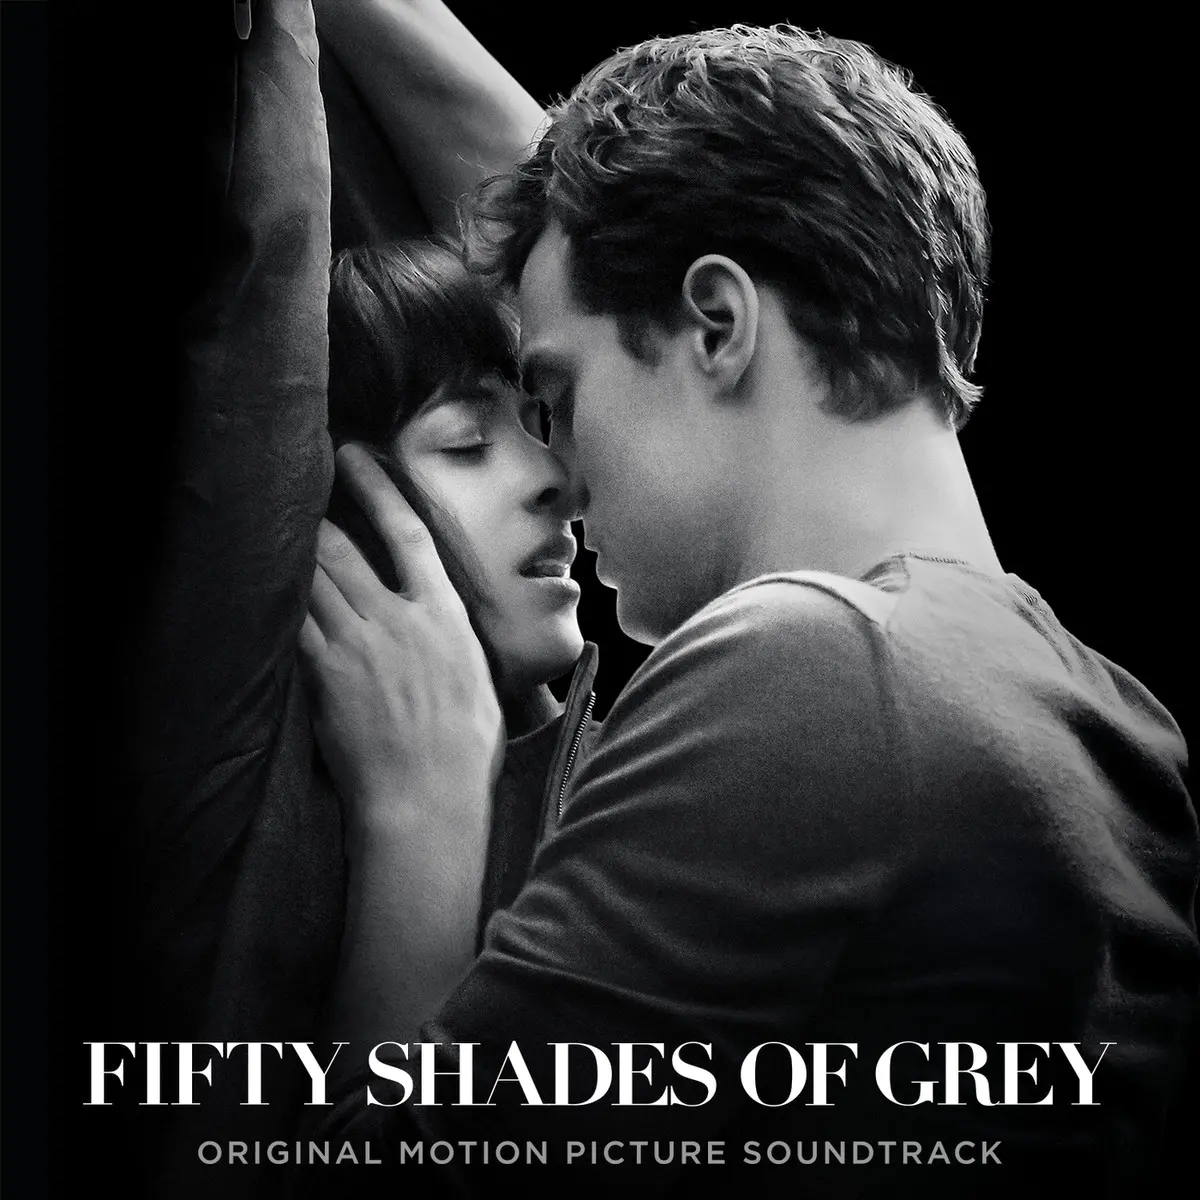 MOVIE SOUNDTRACKS, The Weeknd’s track “Earned It” screams seductive, just like Fifty Shades Of Grey. 